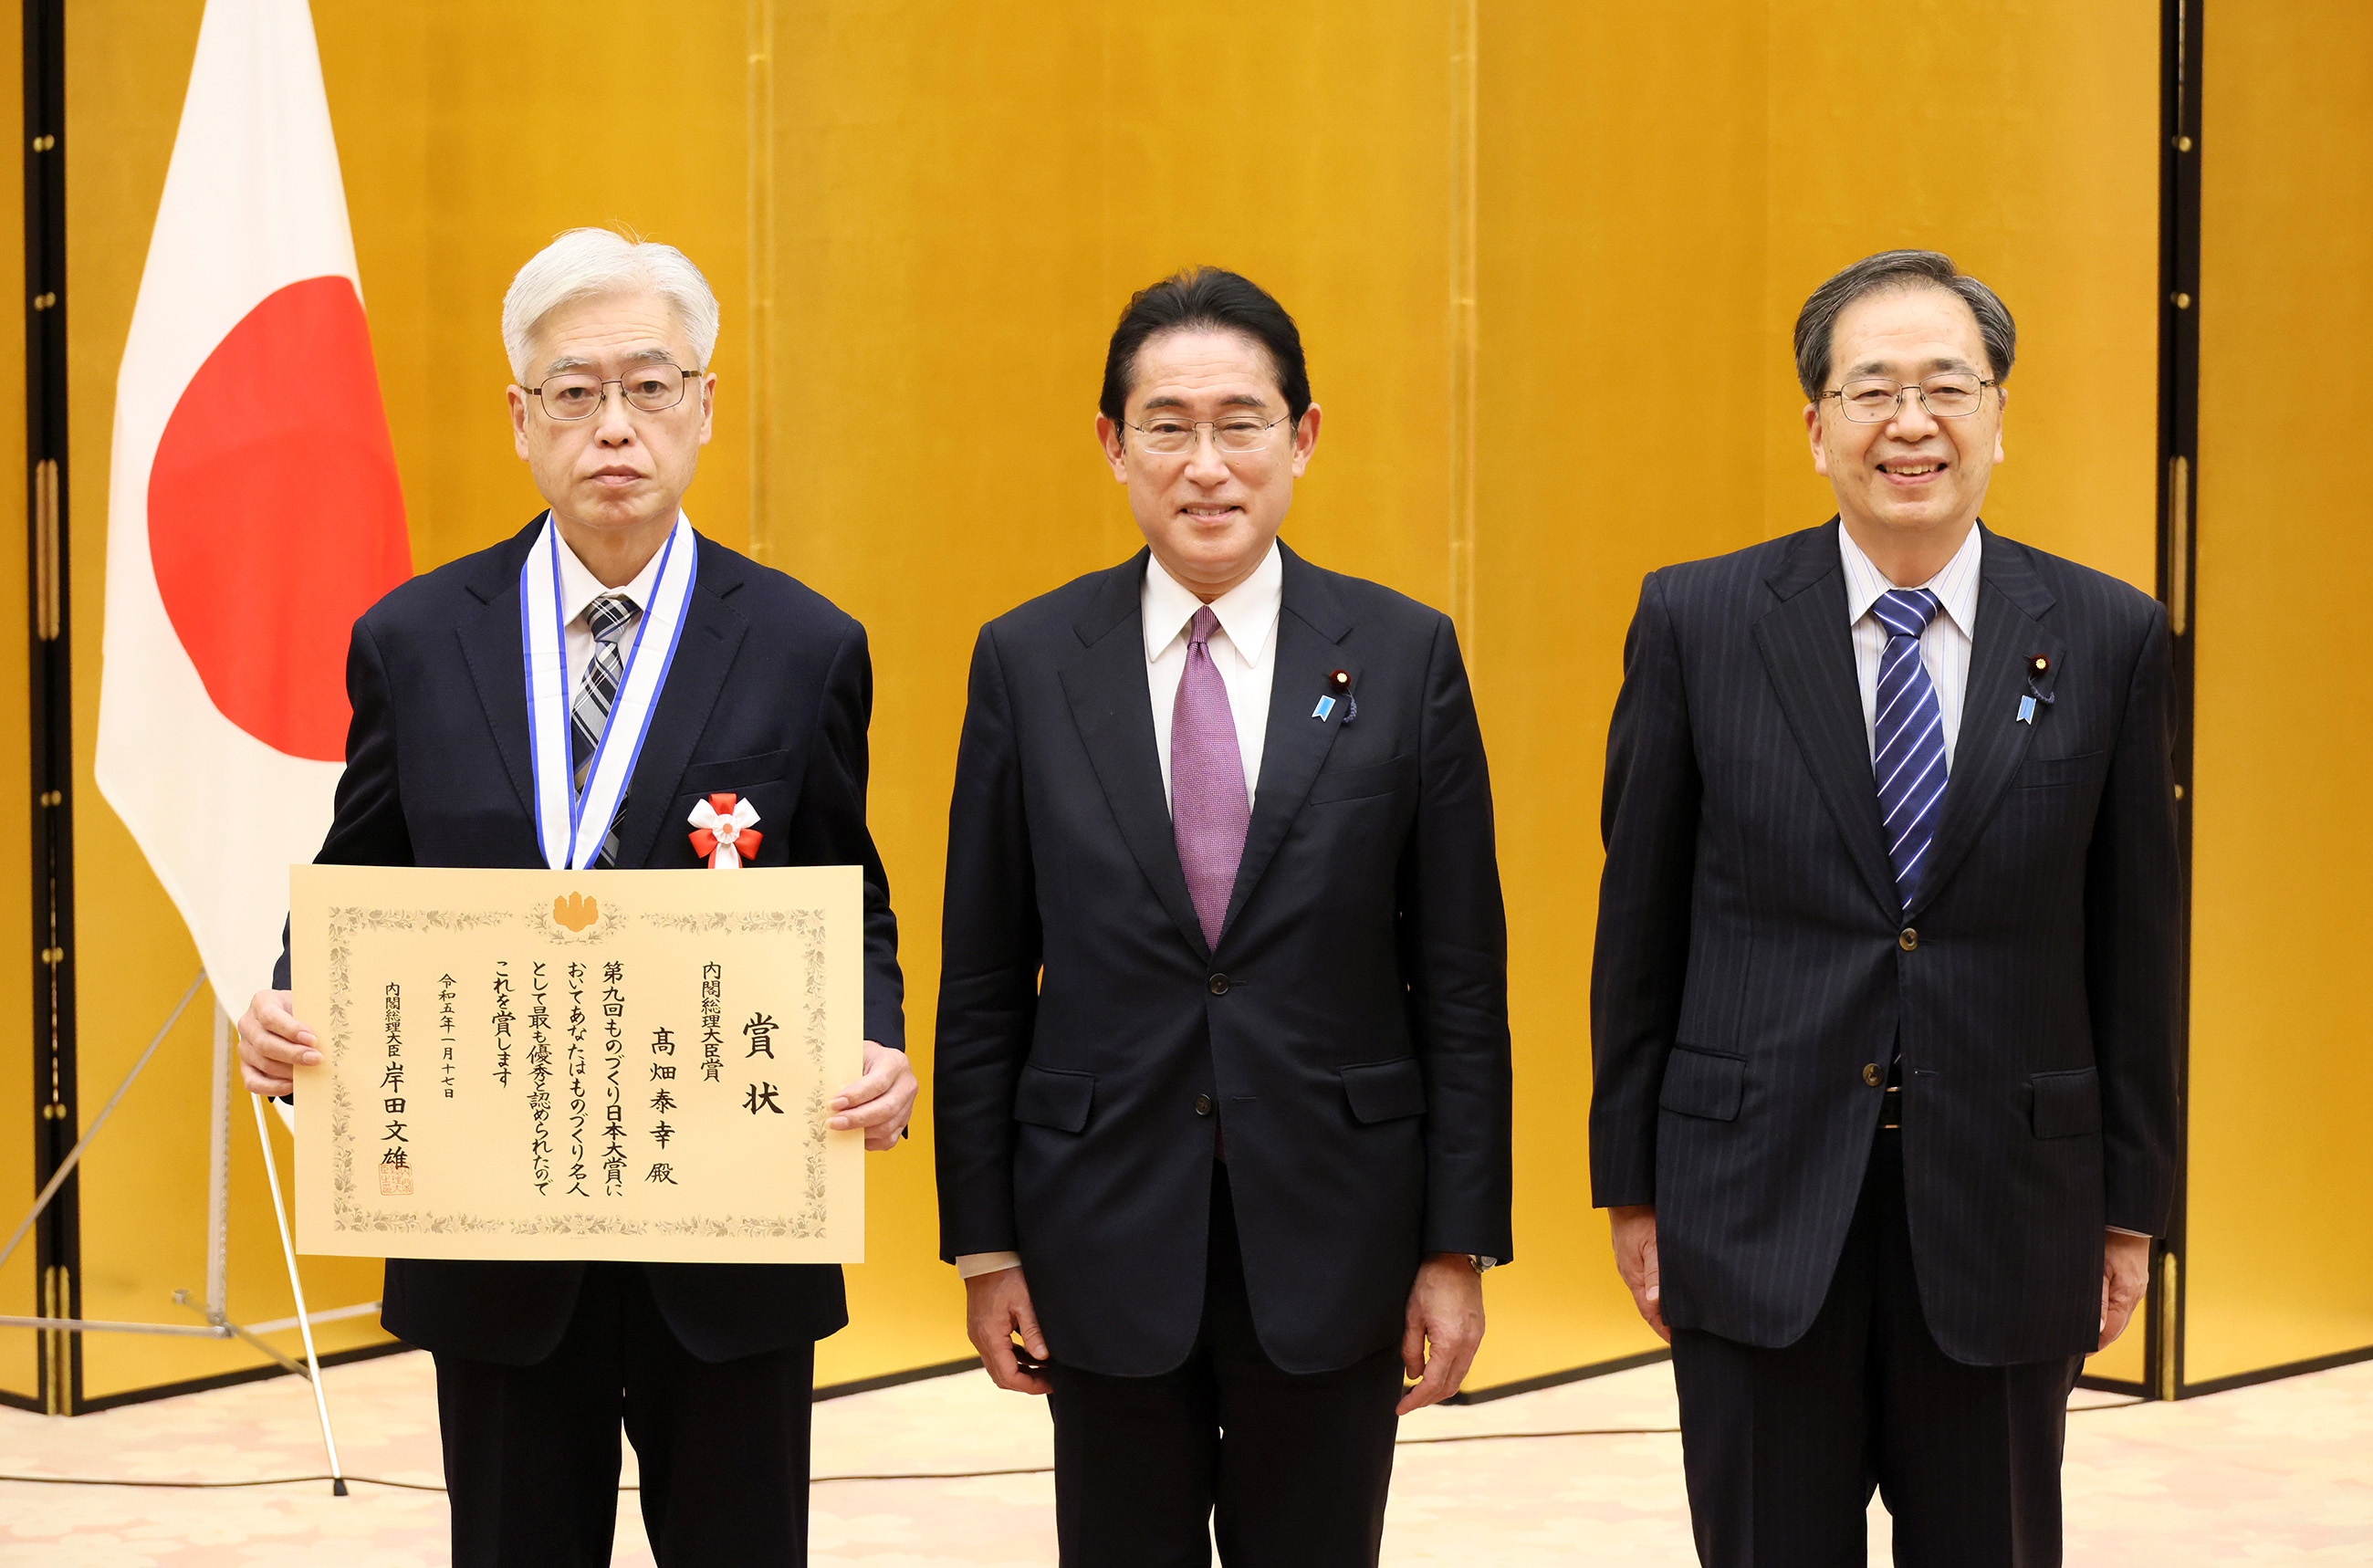 Commemorative photo session with award winners (5)